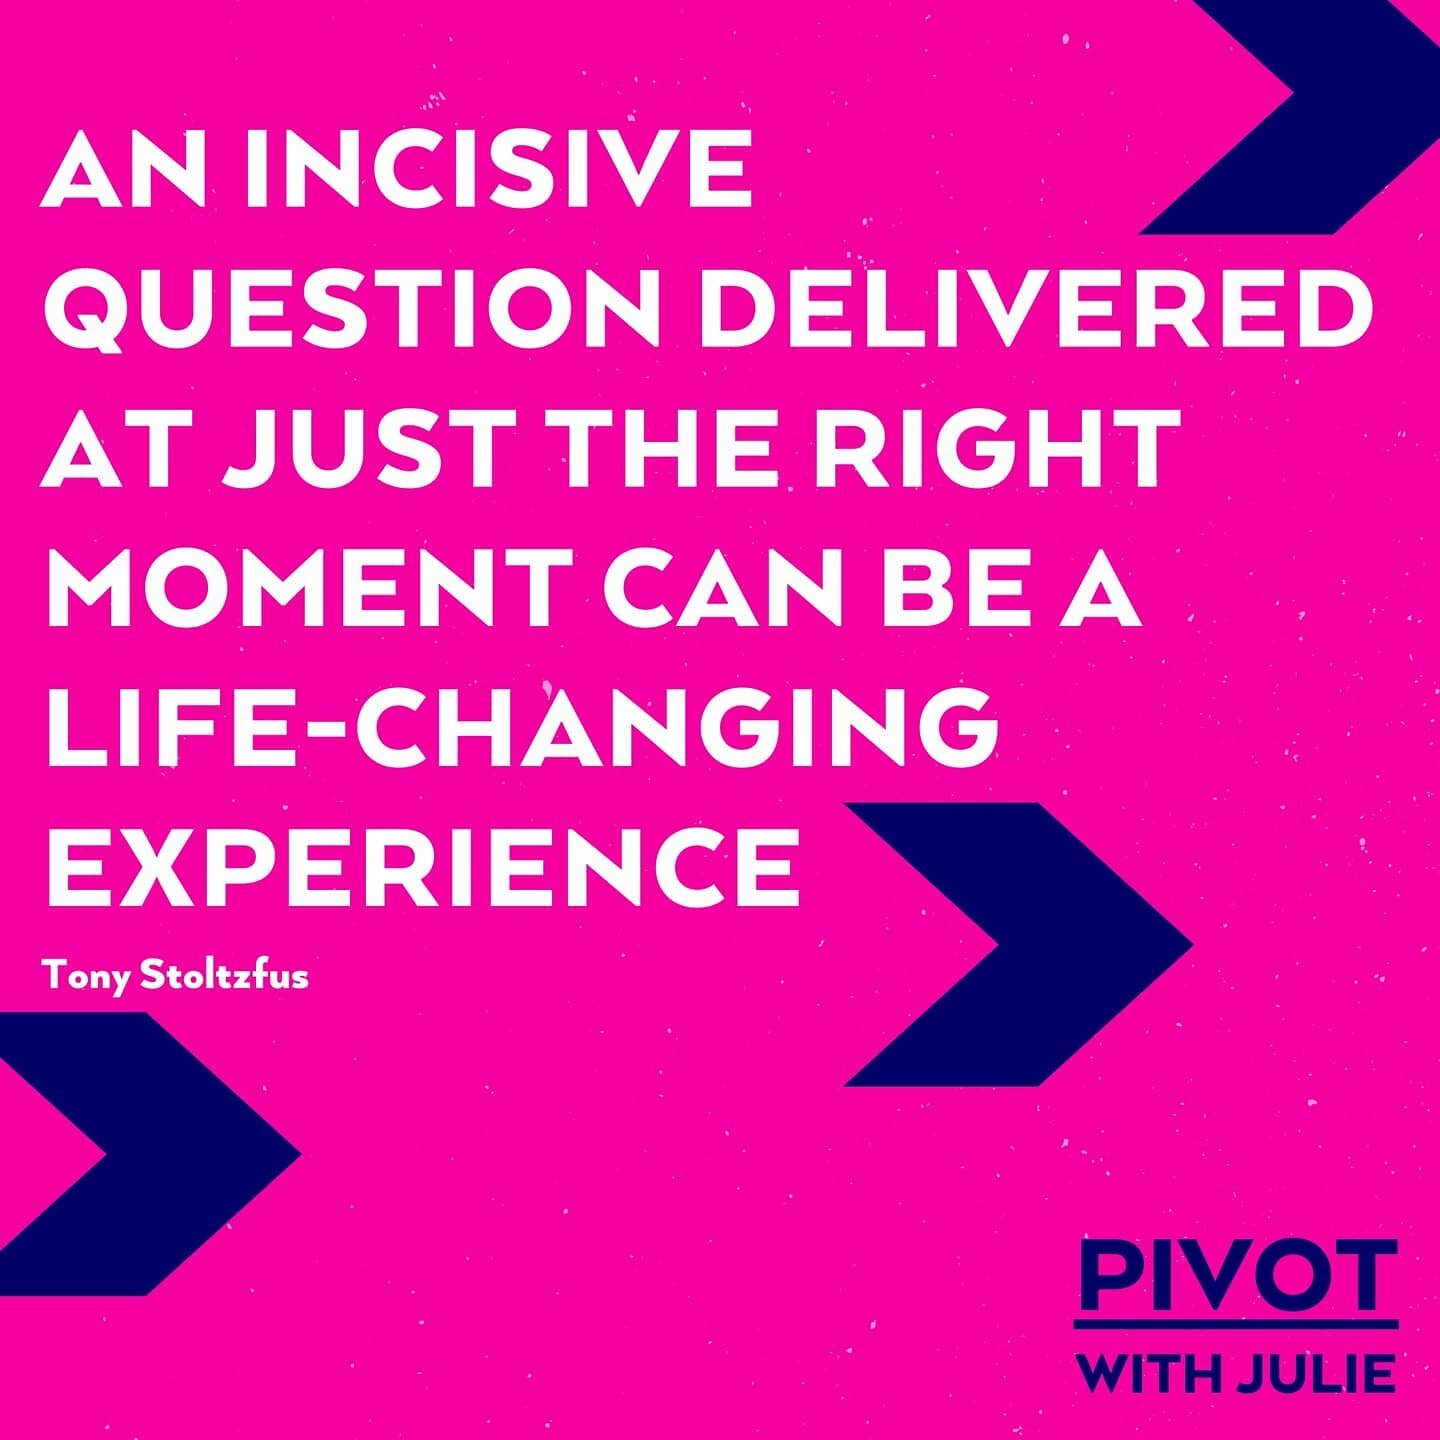 Are you ready to discover that question? Schedule your free introductory session today! 
.
.
.
.
#coaching #coach #performancecoach #executivecoach #executivecoaching #pivotwithjulie #leader #leadershipcoaching #leadership #leadershipdevelopment